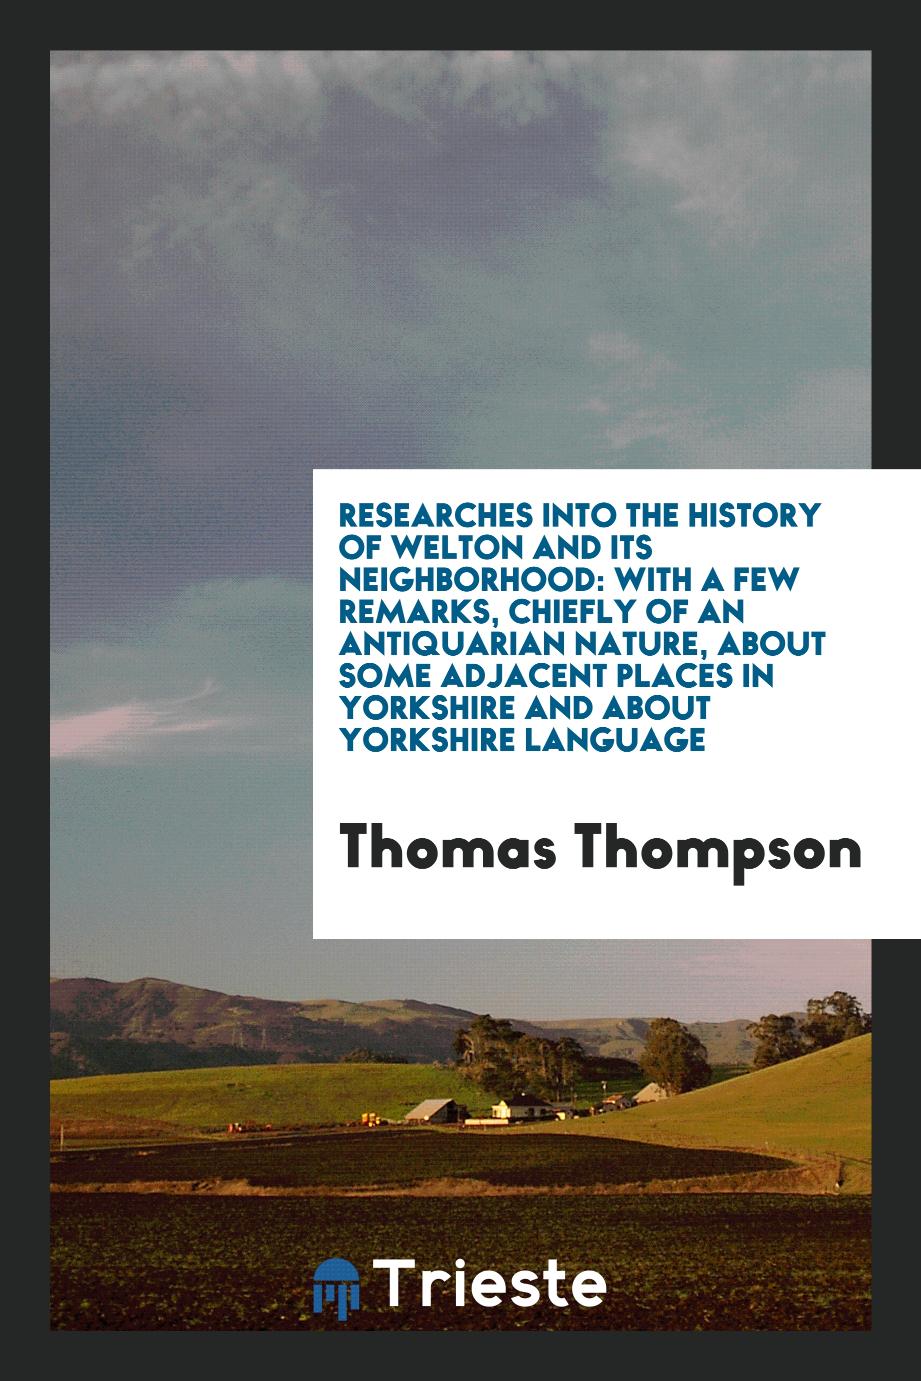 Researches into the History of Welton and Its Neighborhood: With a Few Remarks, Chiefly of an Antiquarian Nature, about Some Adjacent Places in Yorkshire and about Yorkshire Language